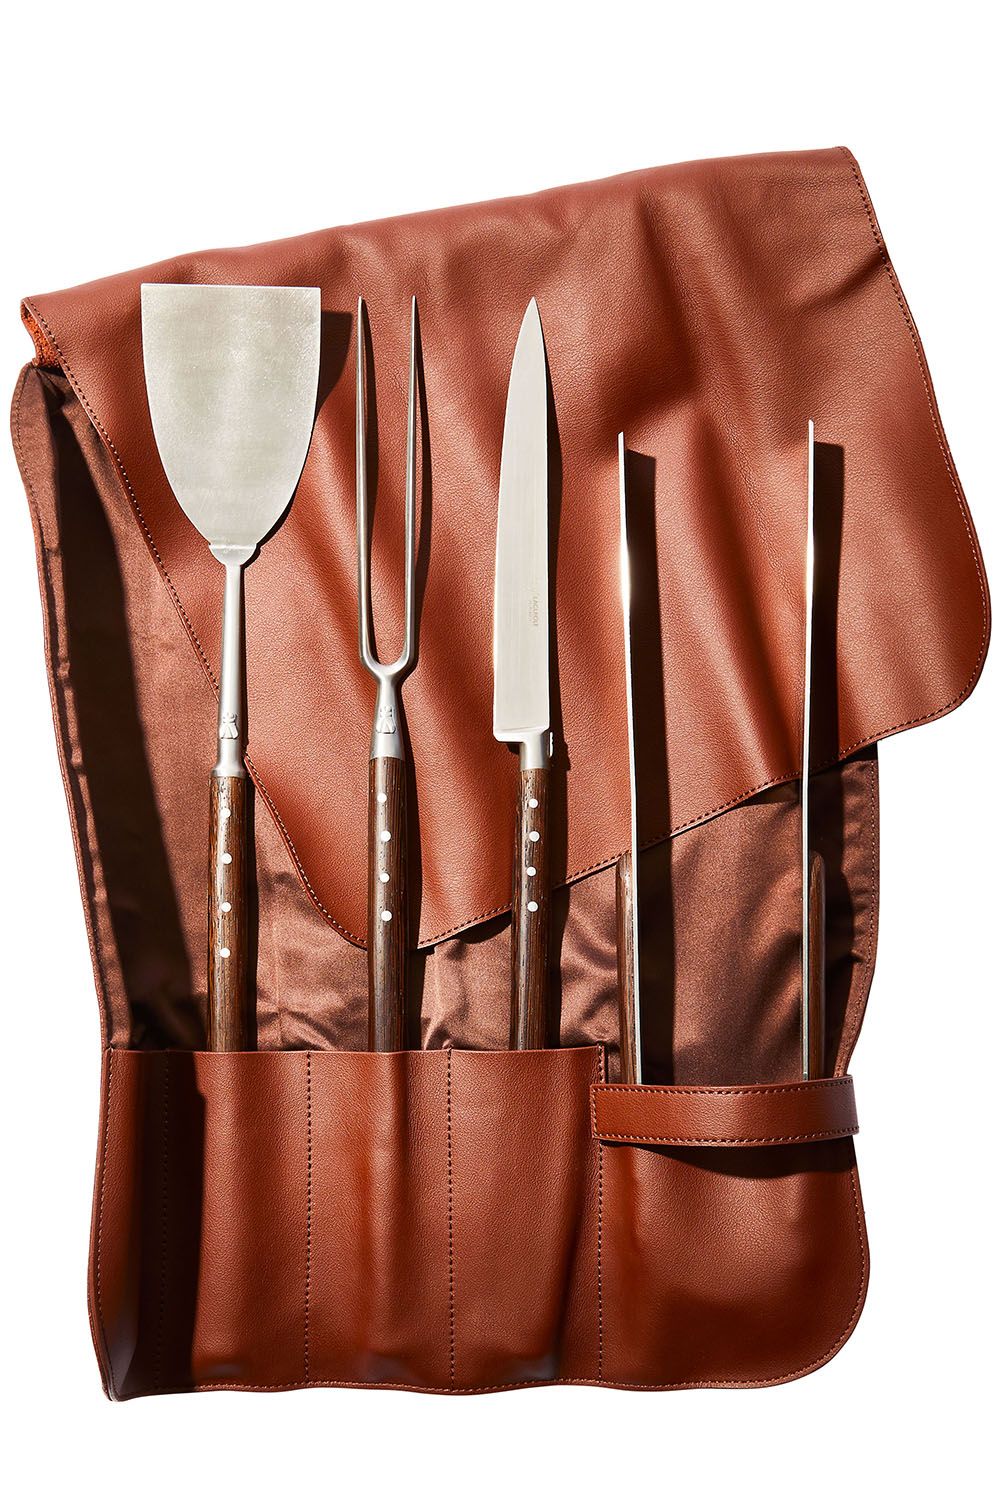 Brown, Leather, Tan, Outerwear, Tool, Personal protective equipment, Peach, Cosmetics, Metal, 